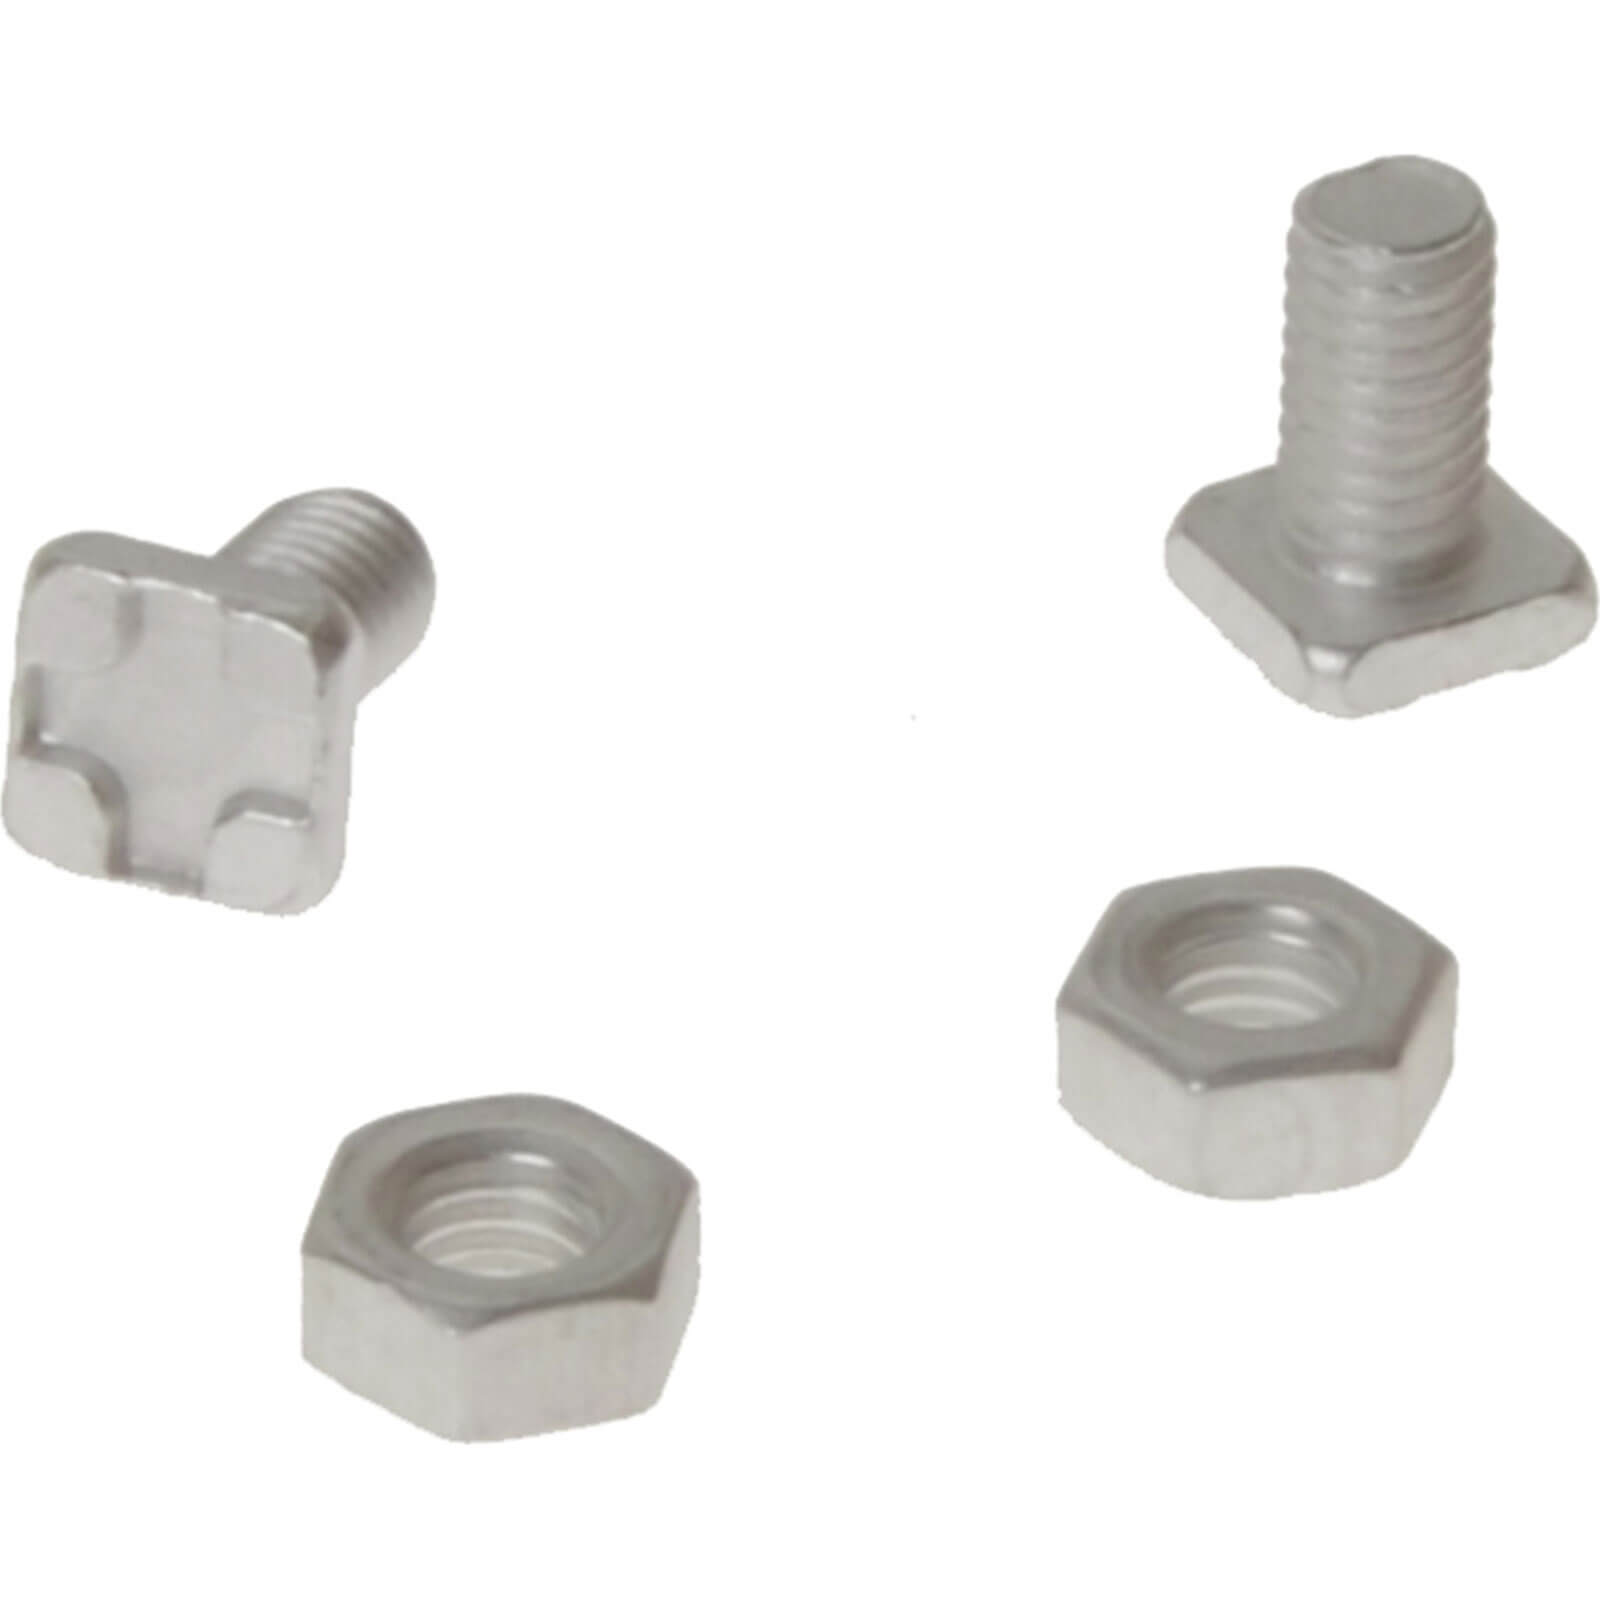 Photo of Alm Gh004 Aluminium Square Head Bolts And Nuts Pack Of 20